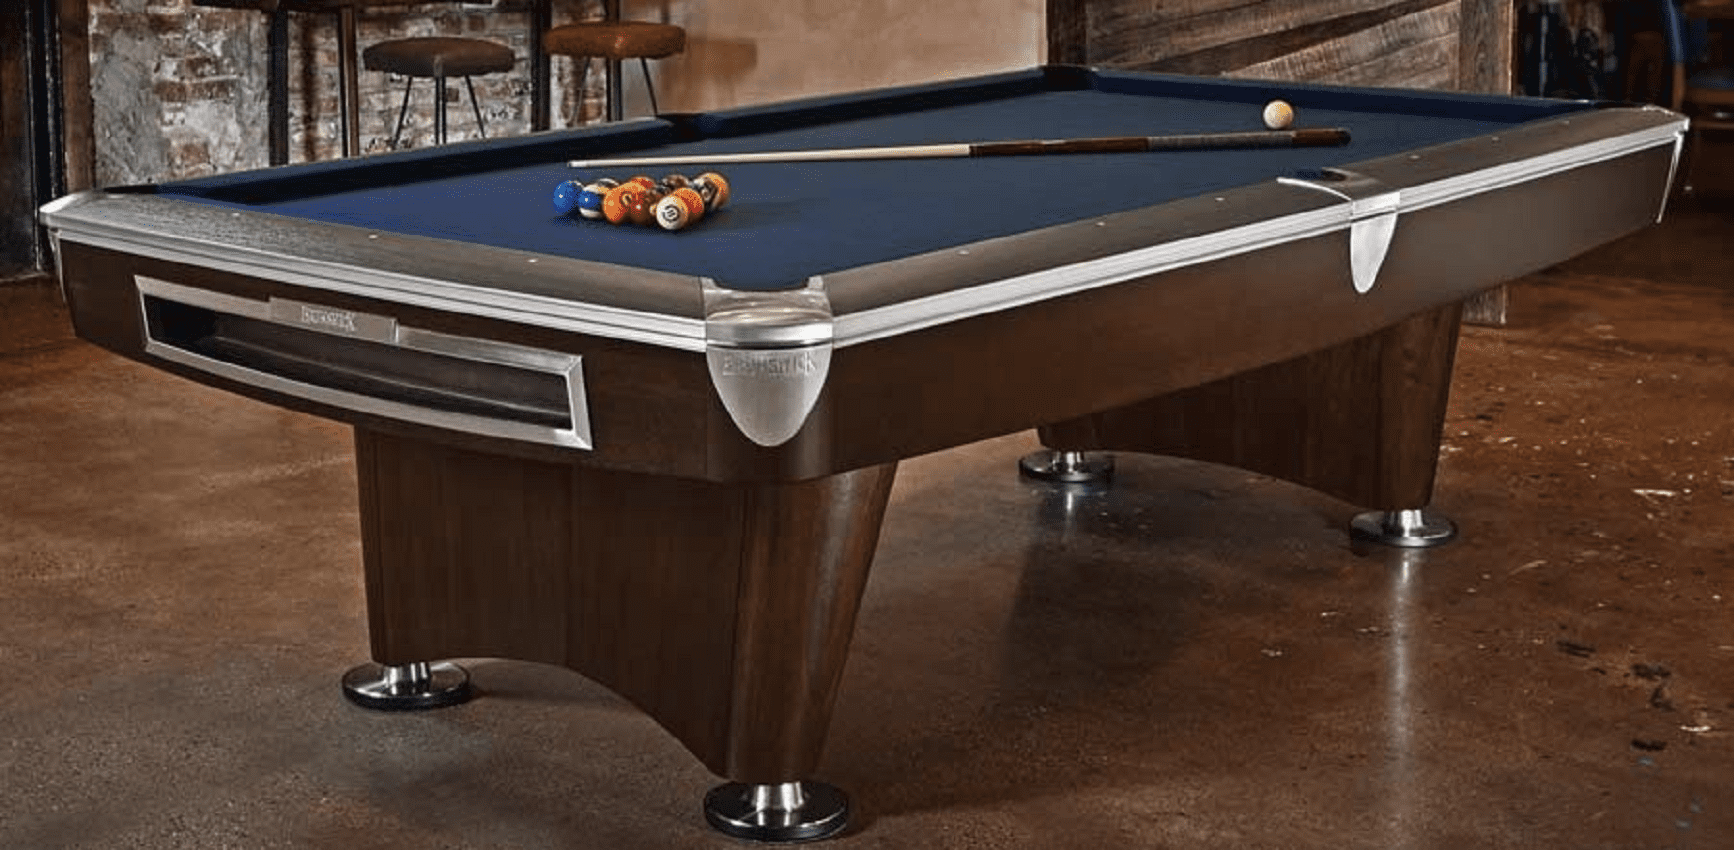 Health Benefits From Playing Pool – Pool Tables Sale Reno, Billiard Tables, NV